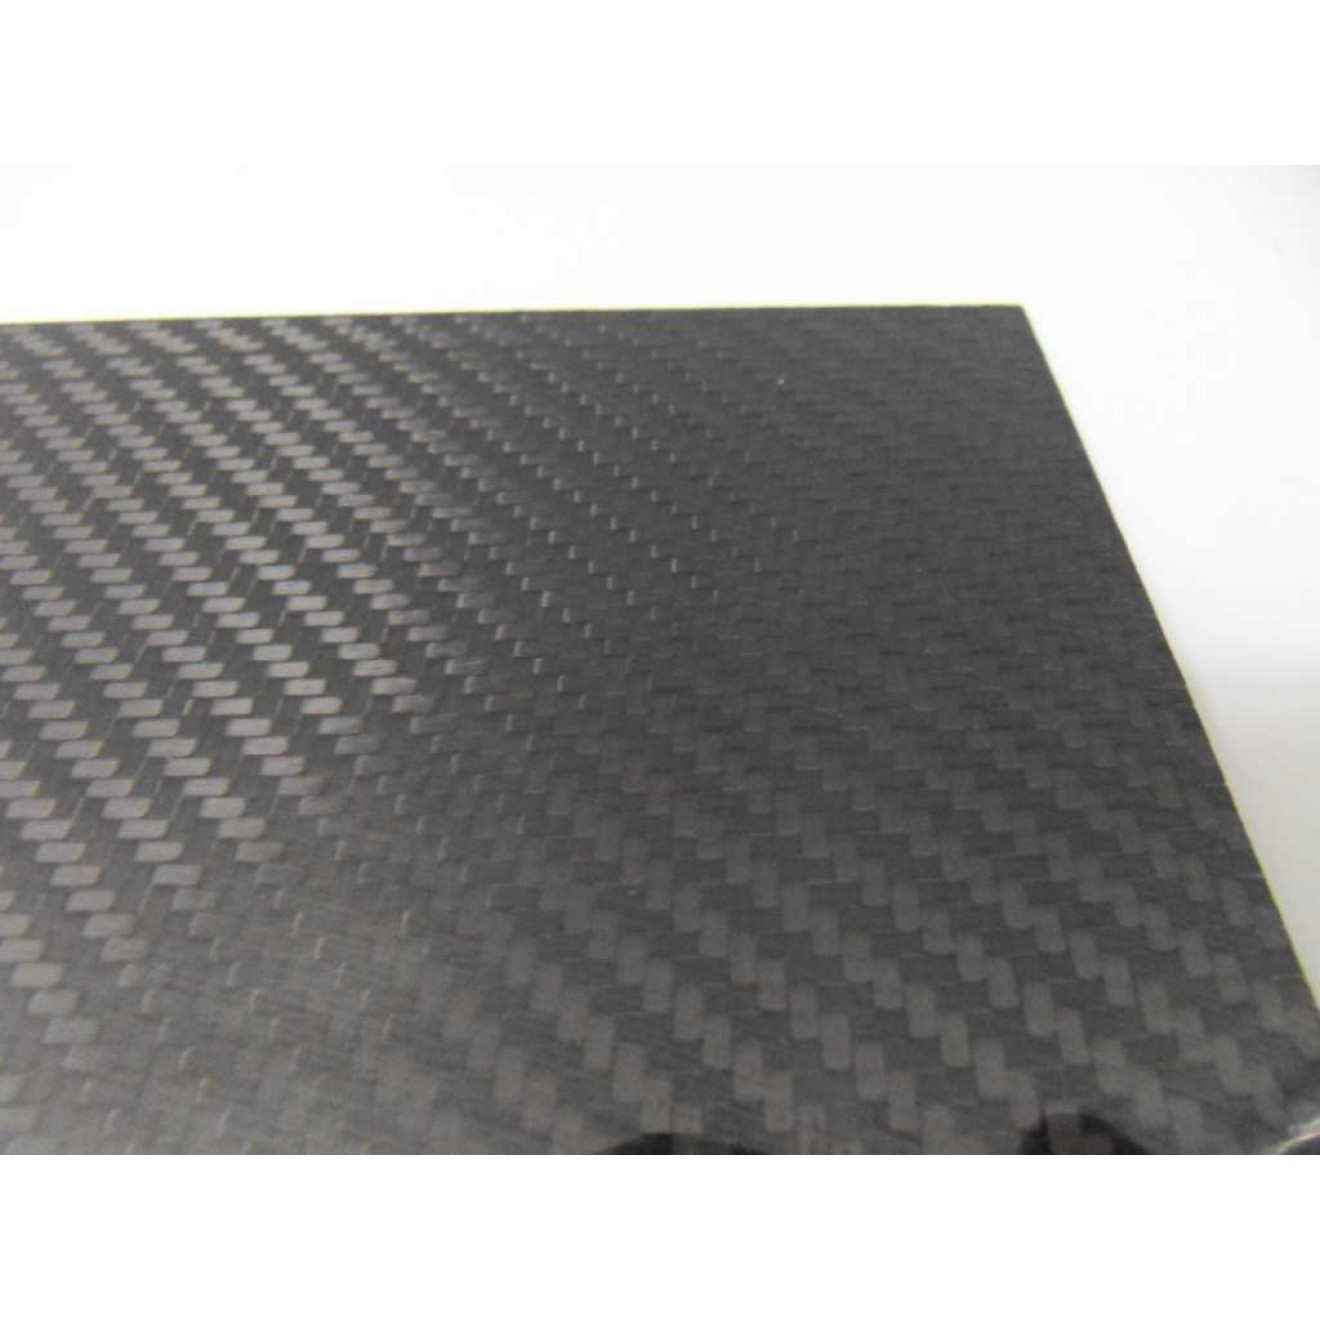 Carbon Fiber/Polycarbonate Sheets 1220x540mm, thermoformable